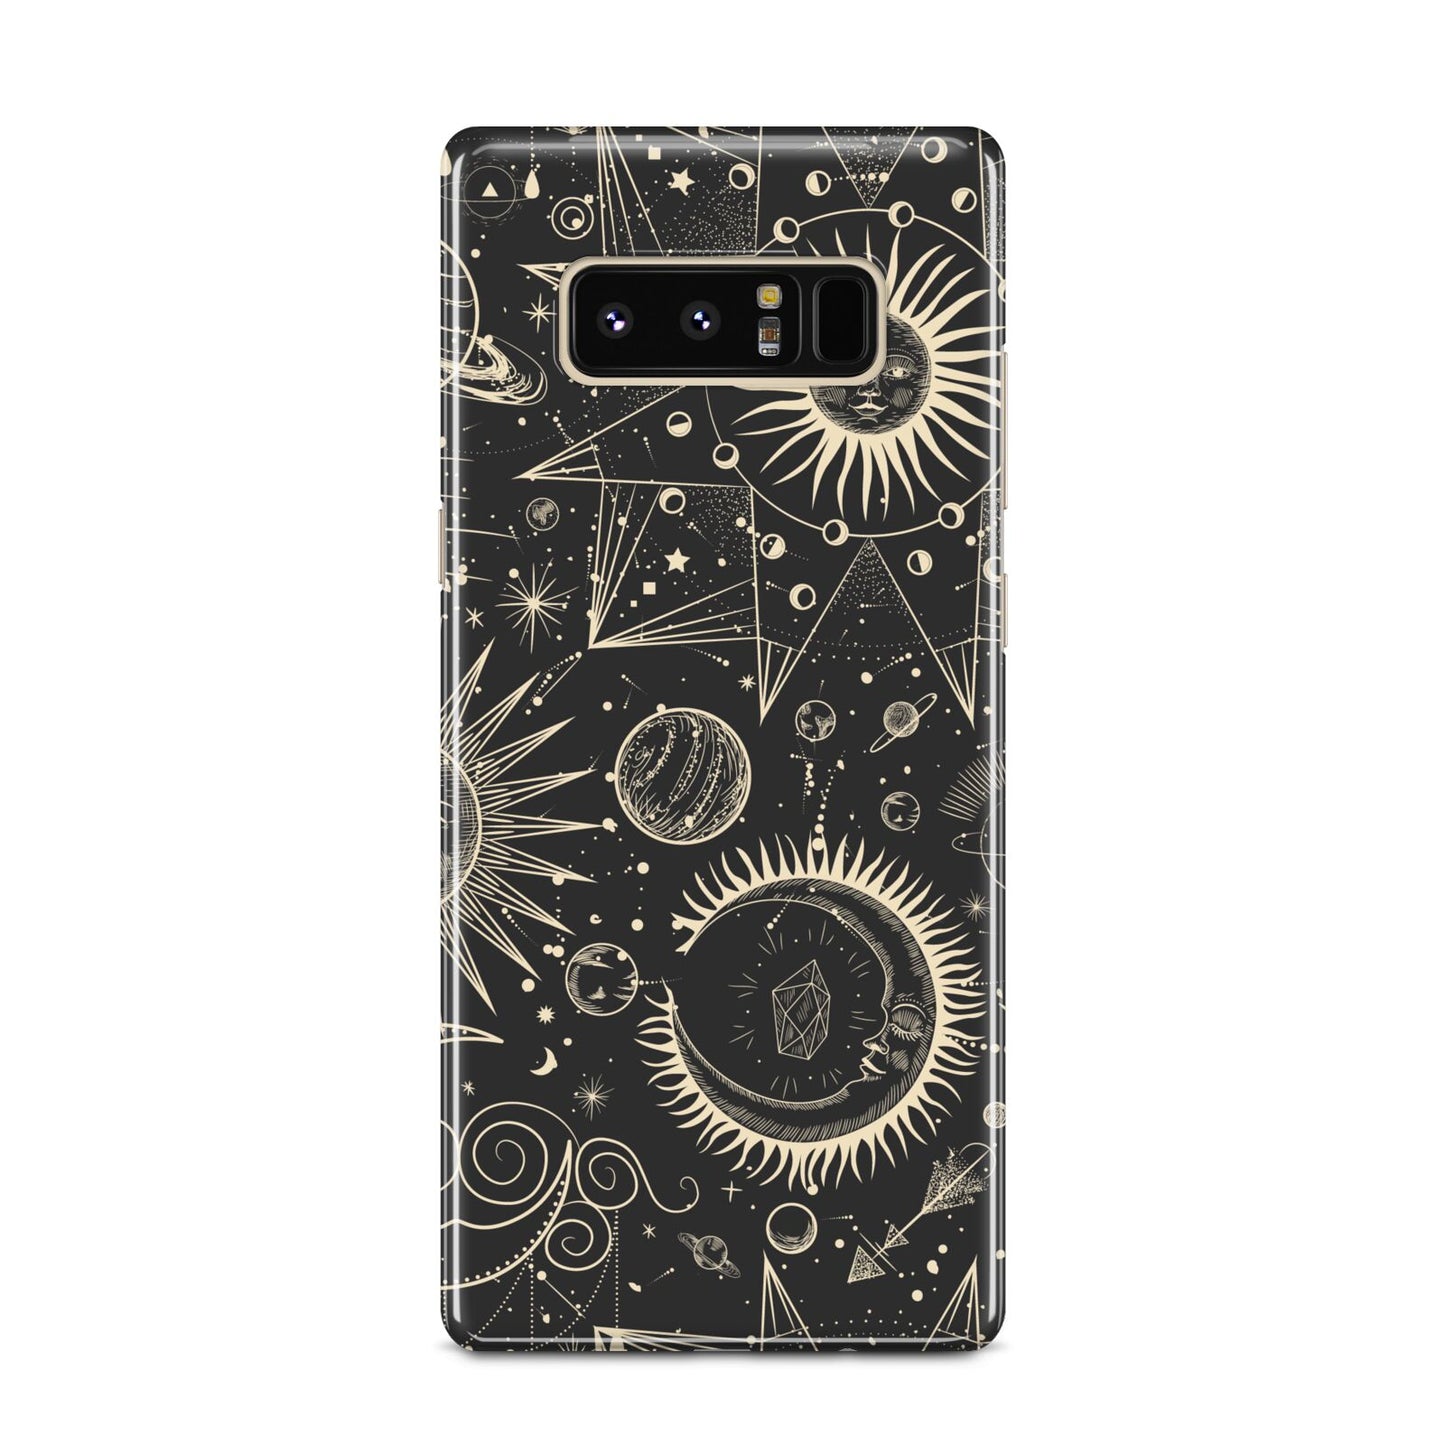 Moon Phases Samsung Galaxy Note 8 Case